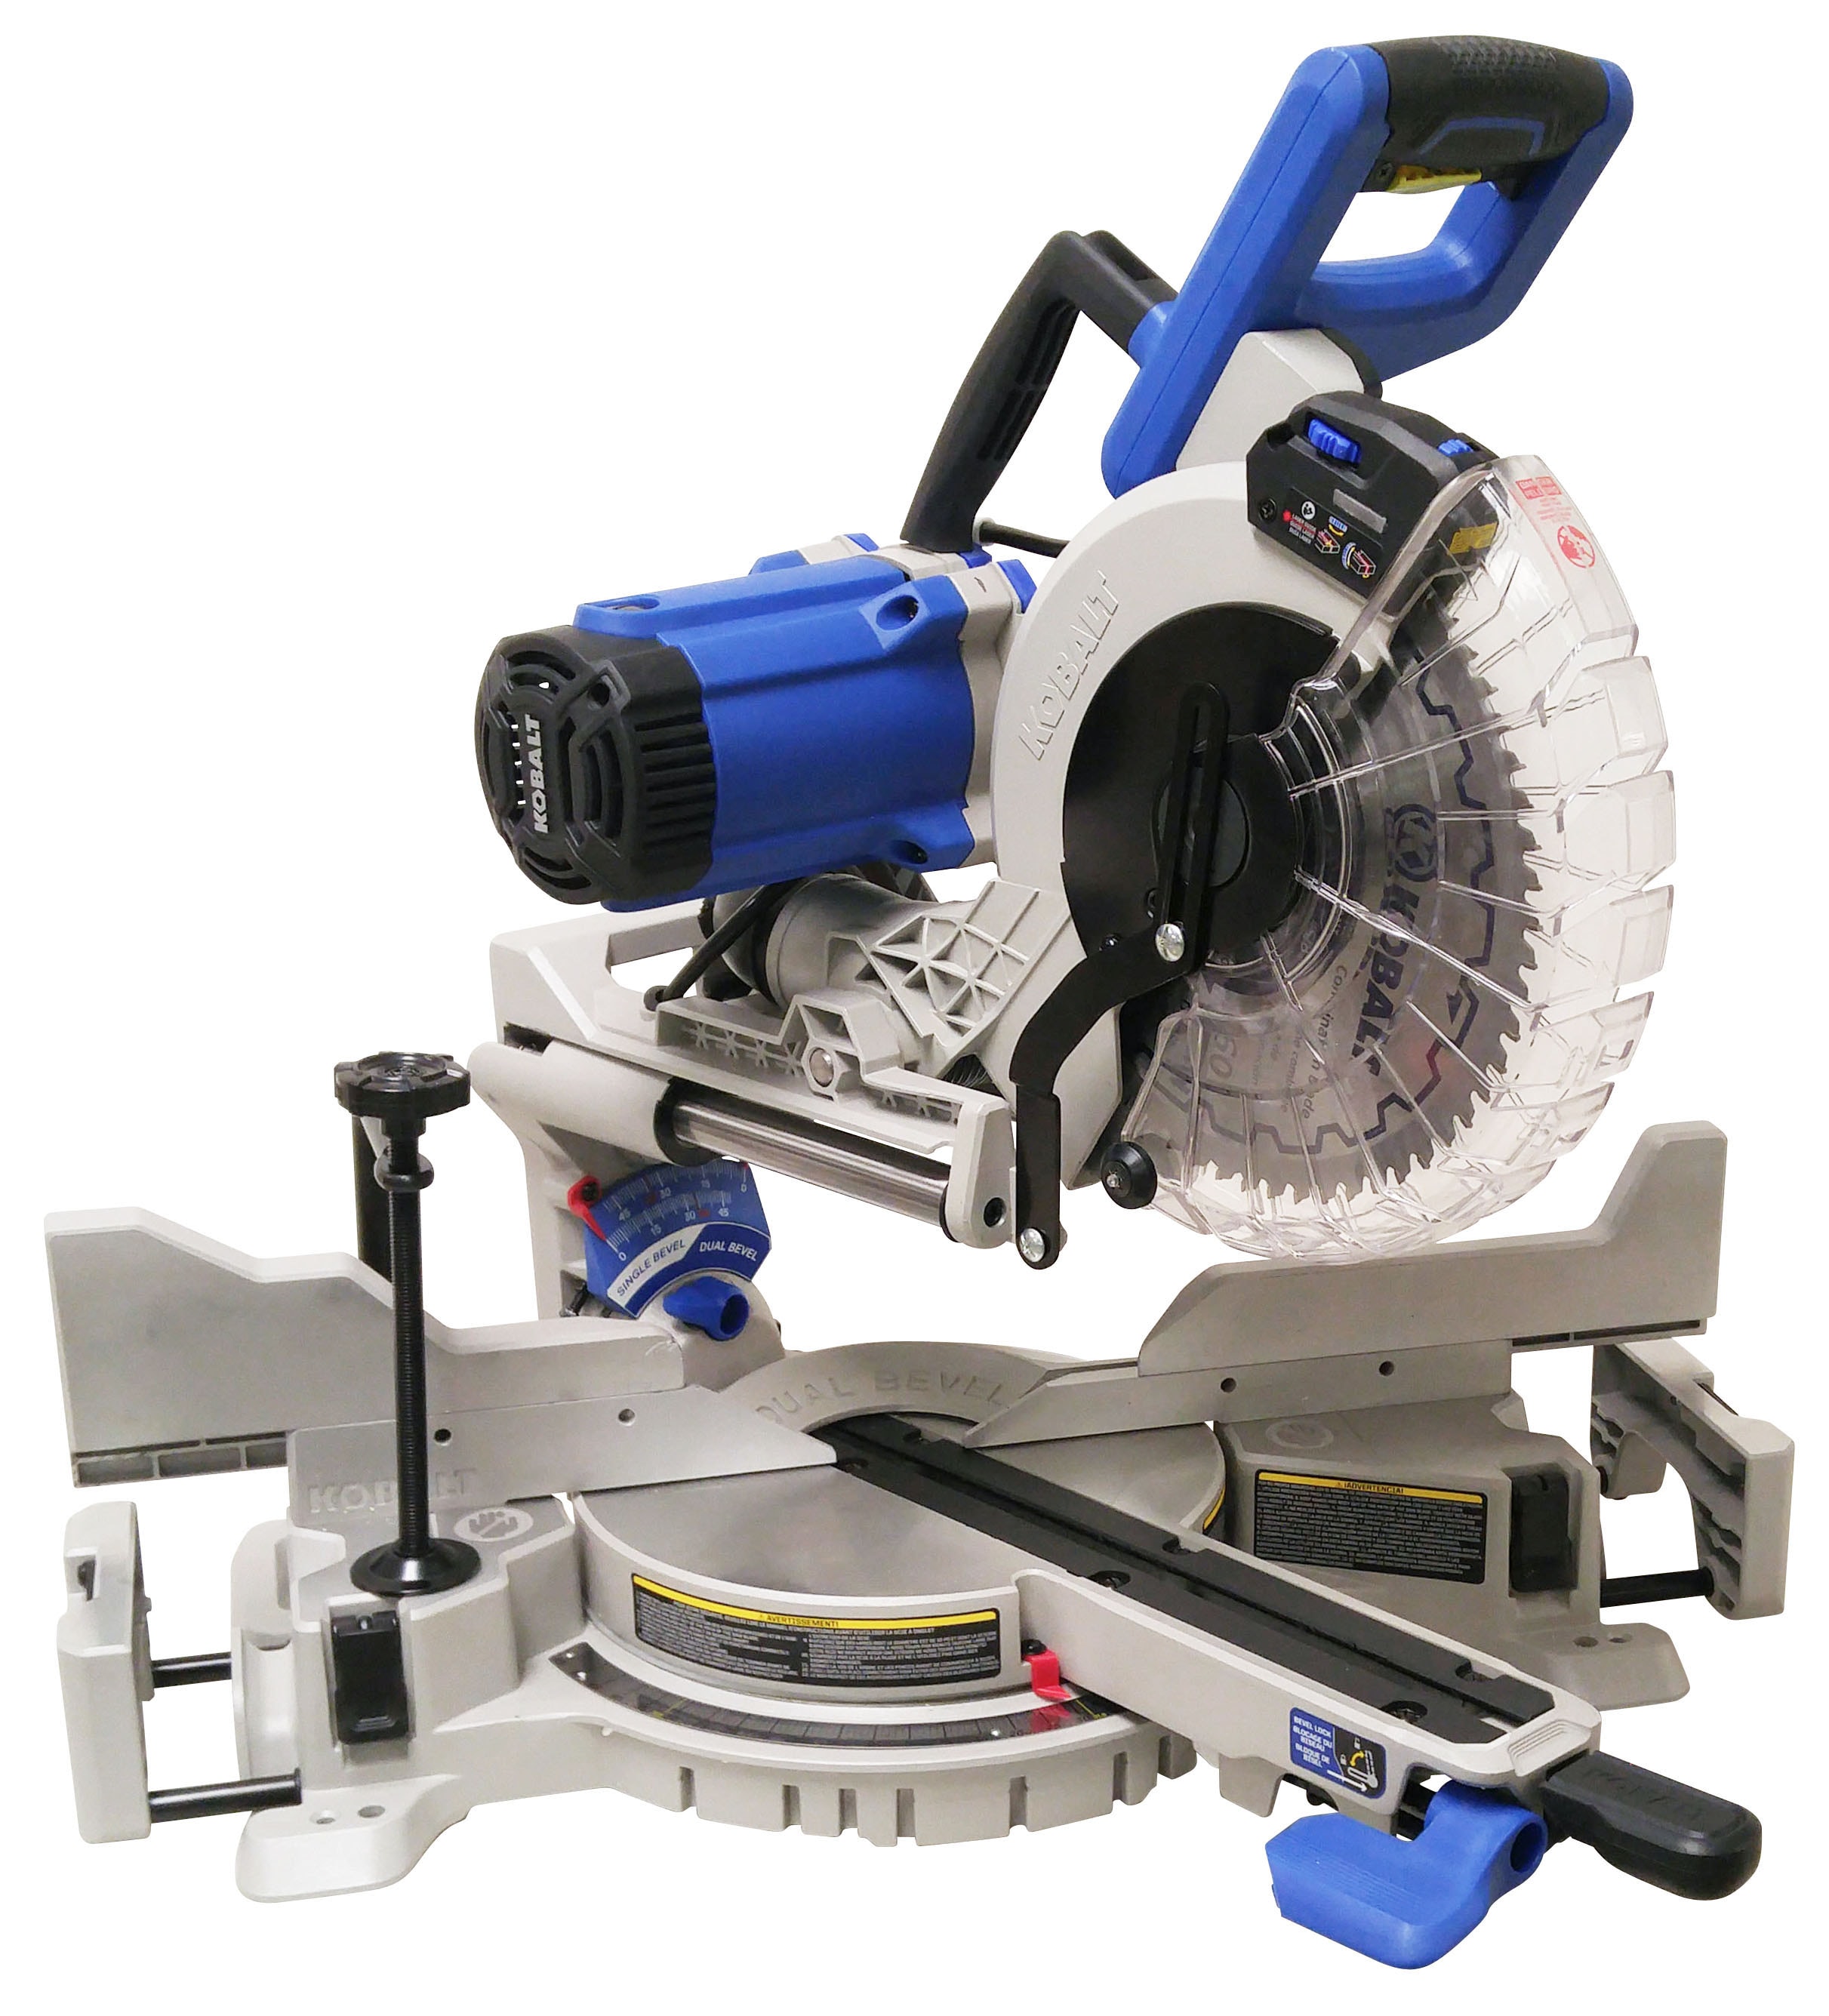 Laser Guide Miter Saws at Lowes.com